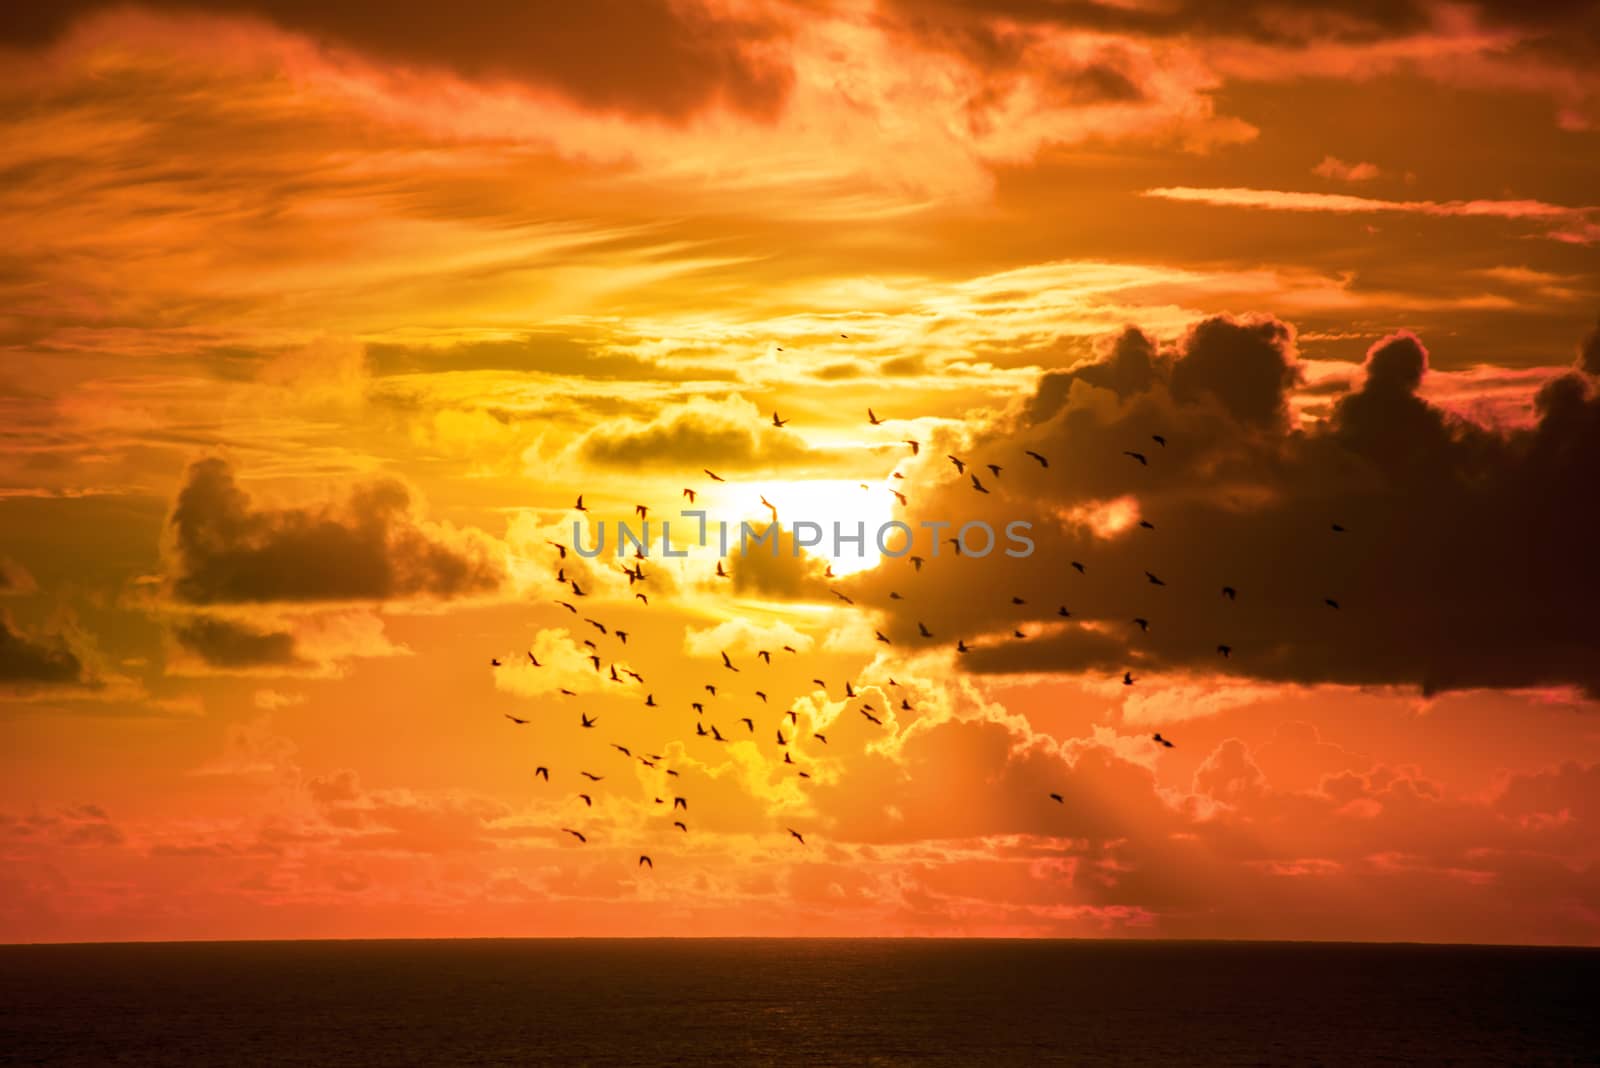 starlings flying into a bright orange sunset by morrbyte